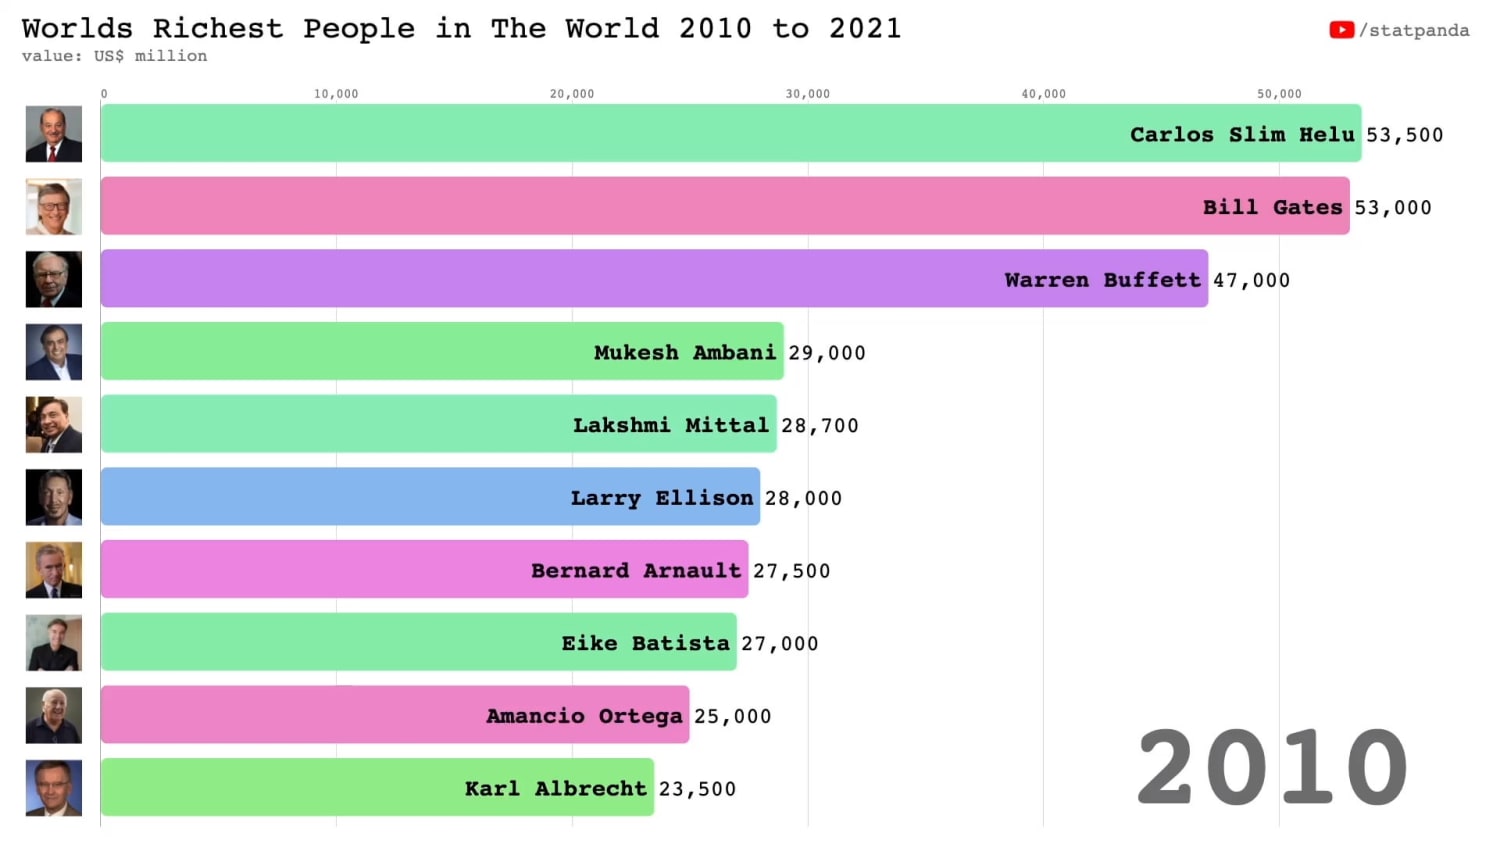 Ranking Forbes Top 10 billionaires from 2010 till now to see Elon Musk's rise to the richest